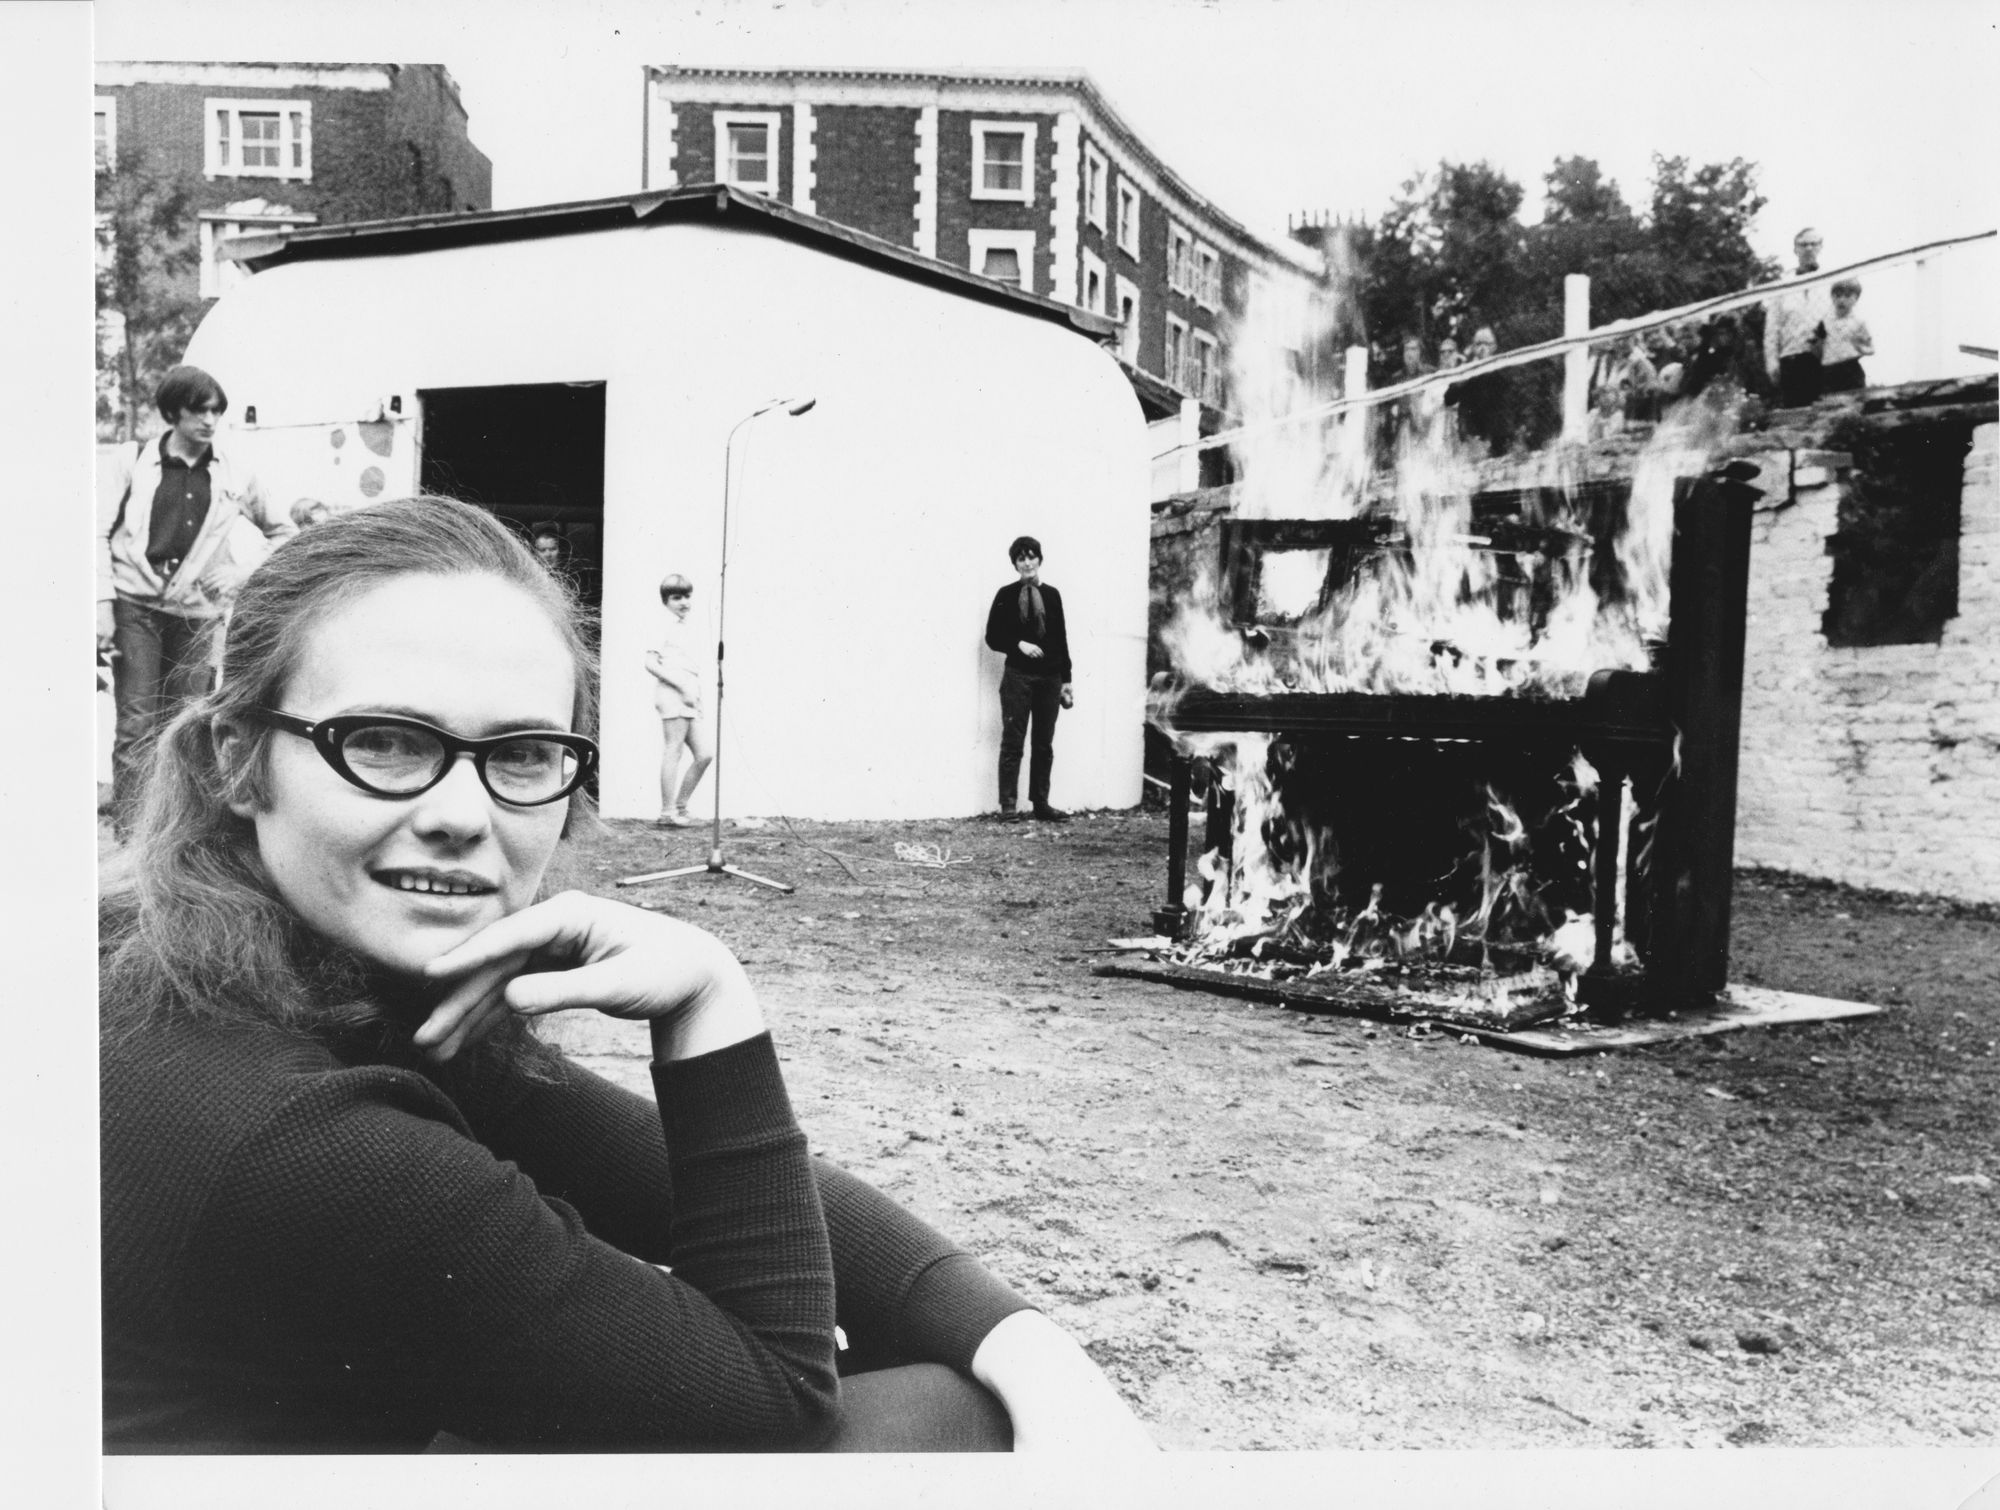 A black and white photograph of a young woman wearing glasses and looking away from a burning piano